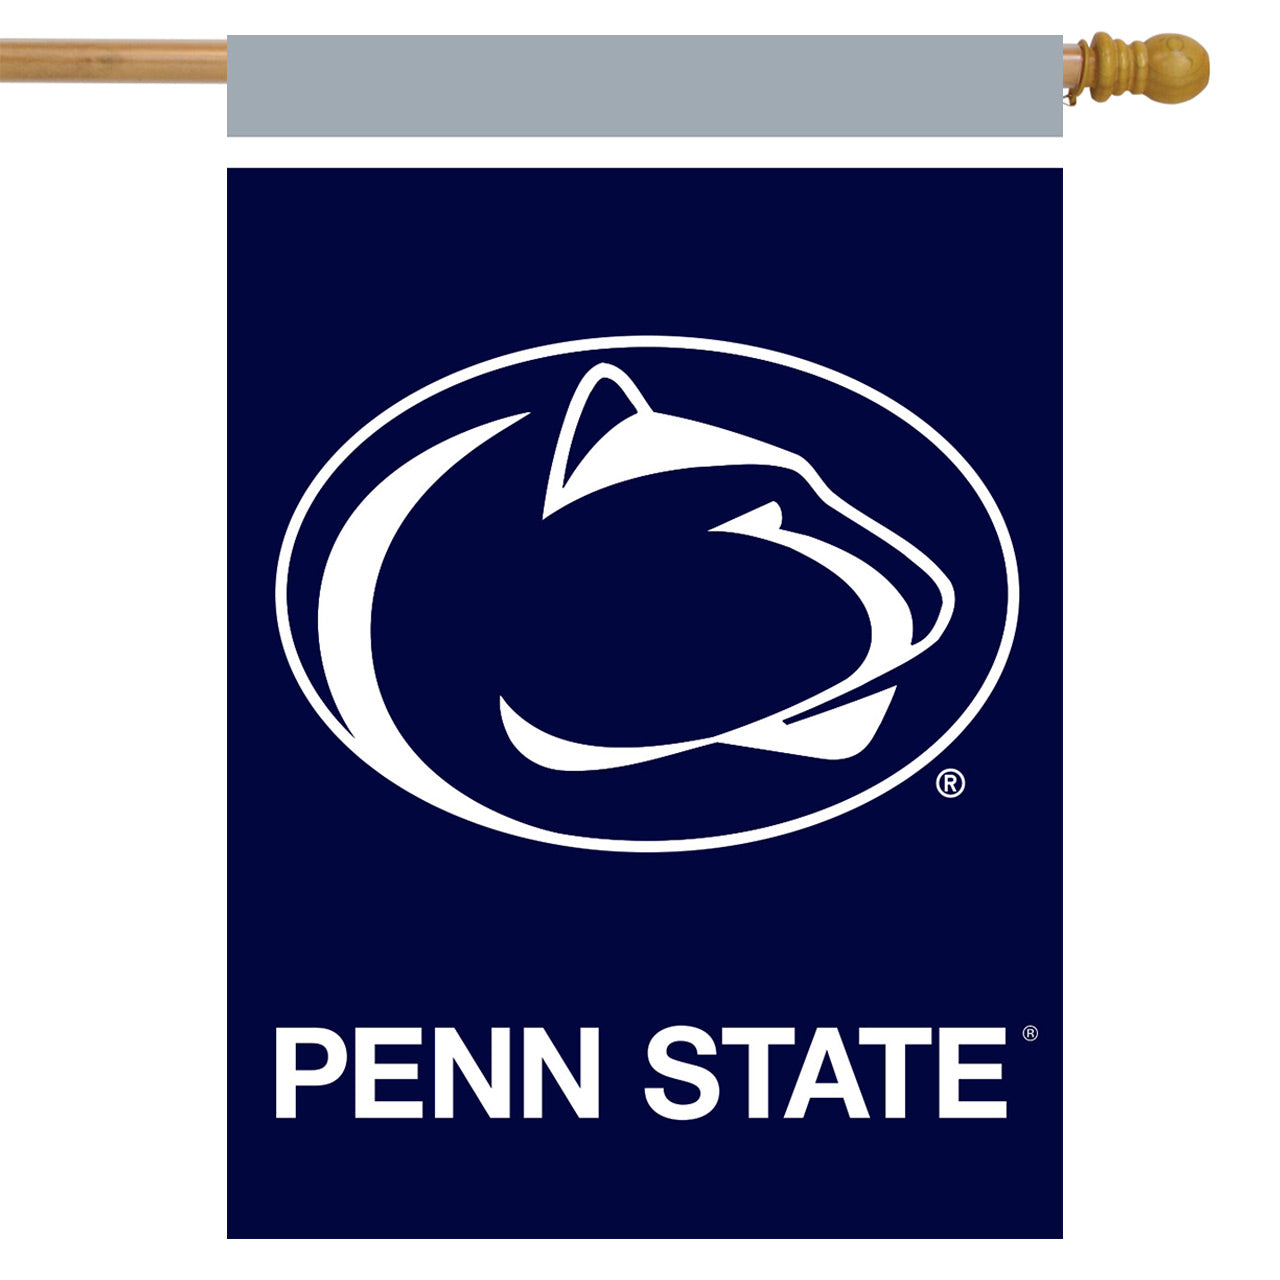 Penn State Nittany Lions Vertical House Flag - Dynasty Sports & Framing 